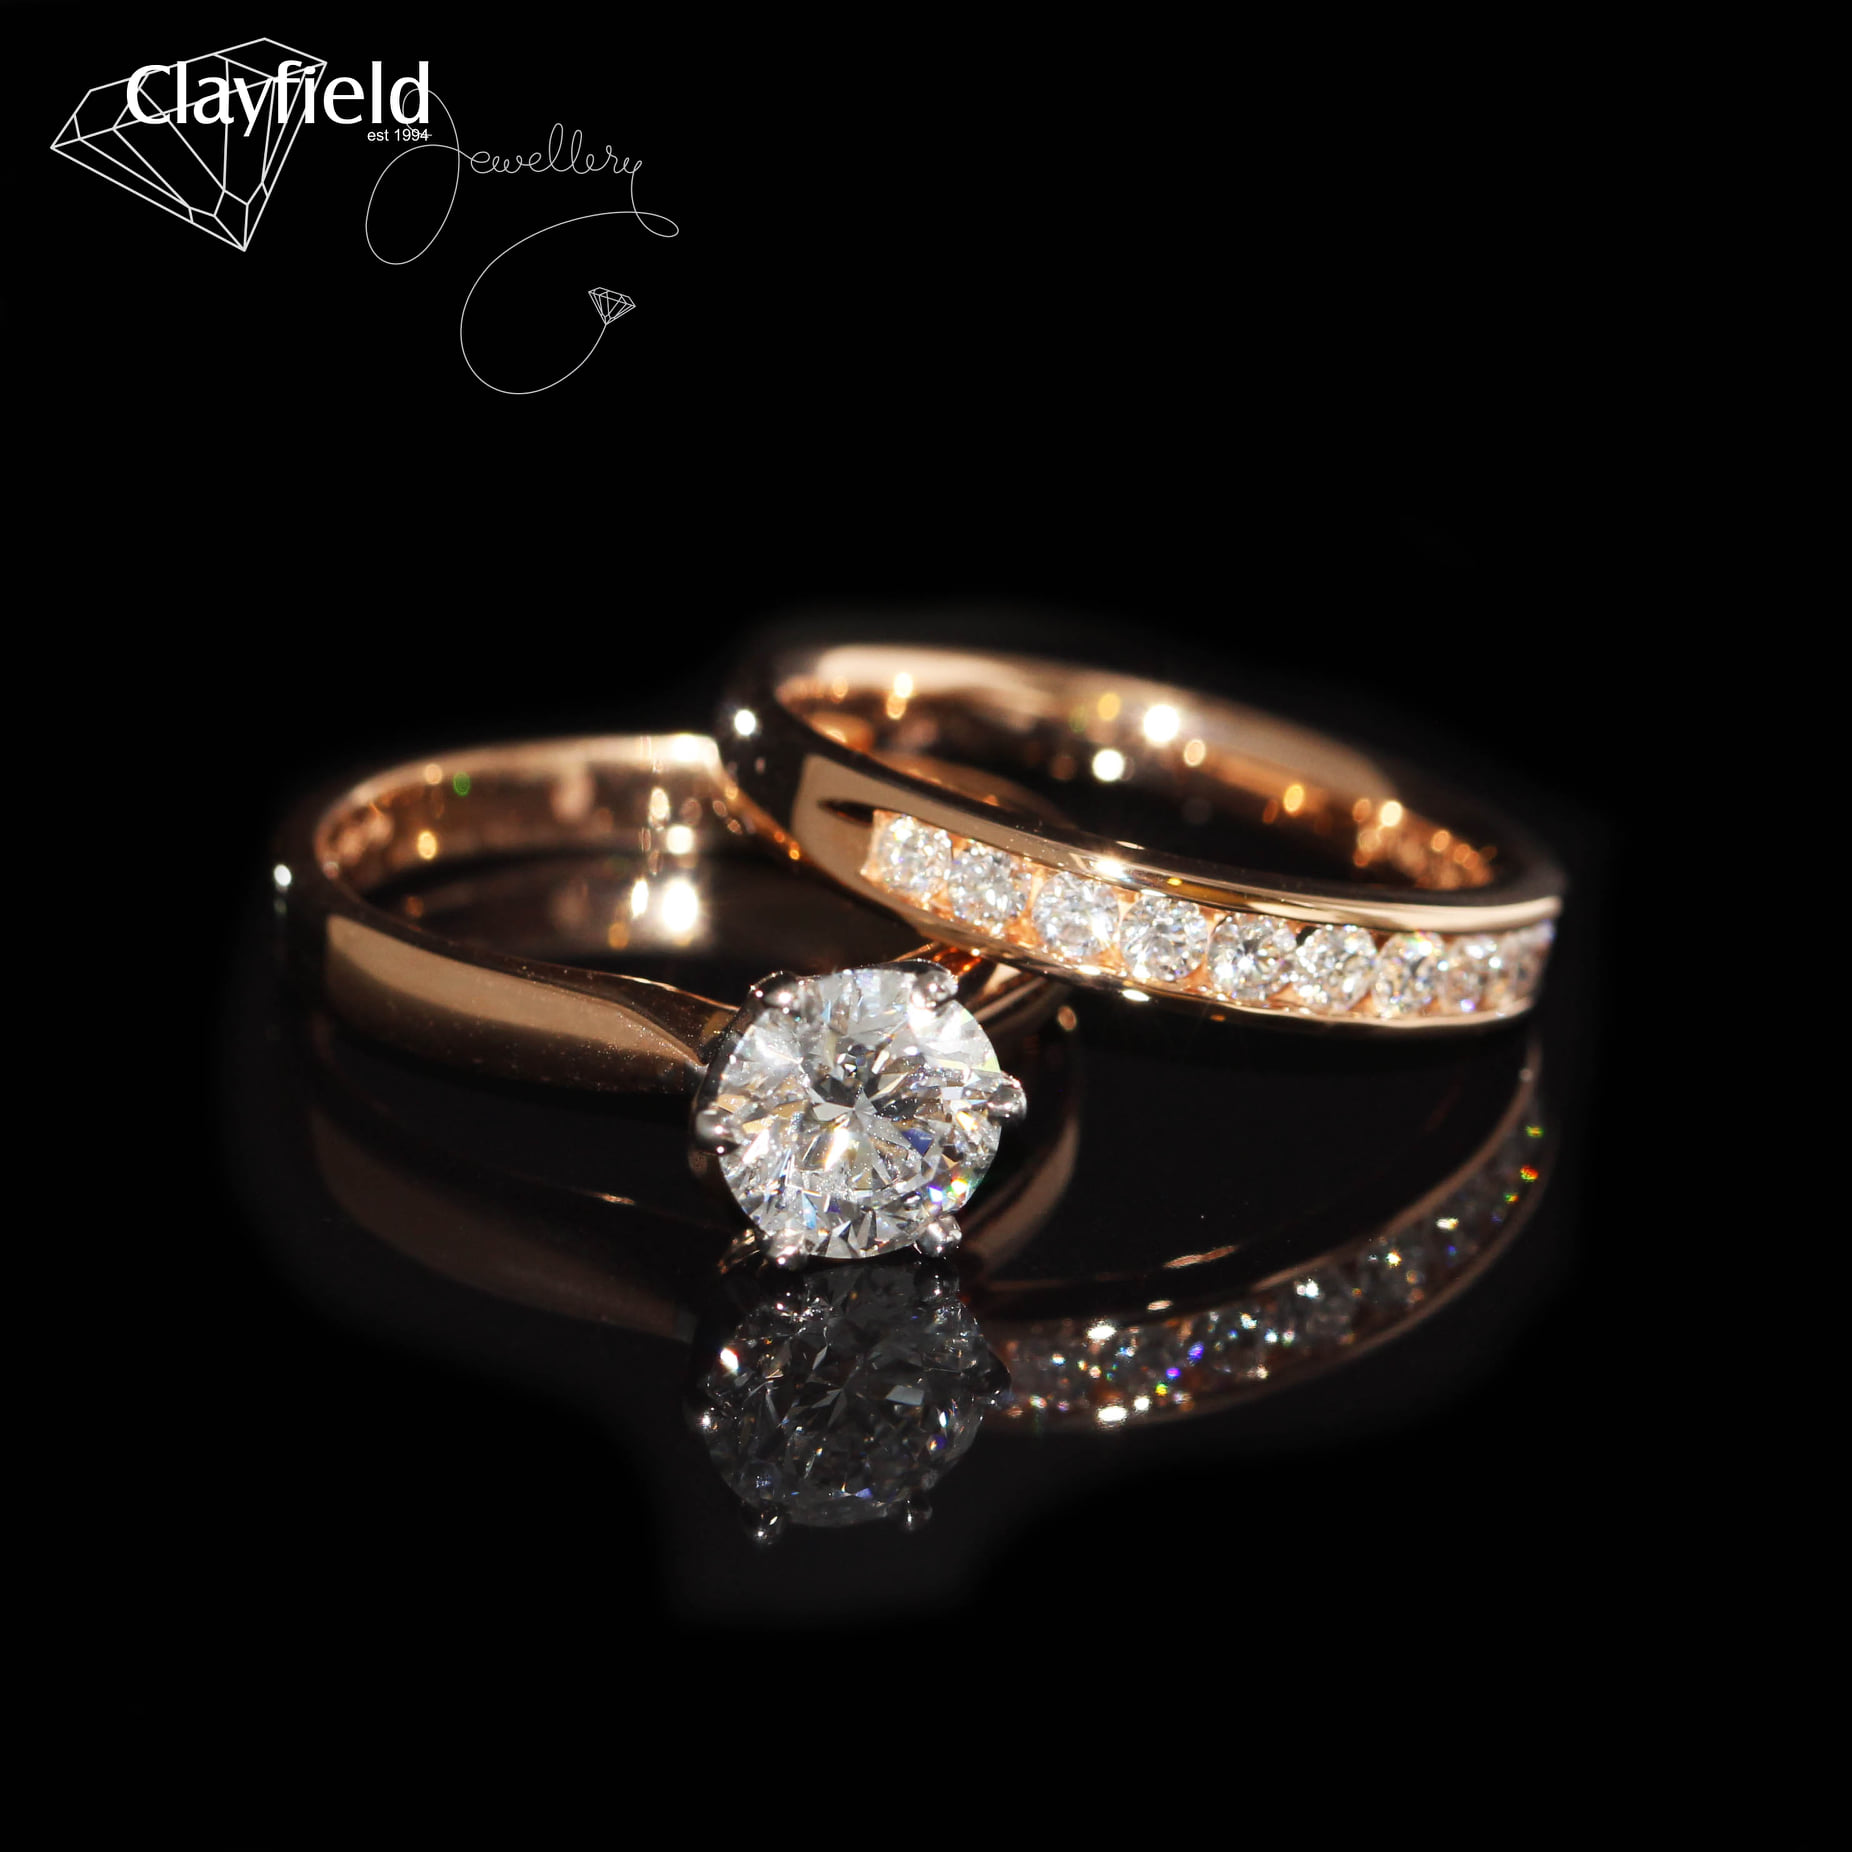 1.21ct D, Si2 Diamond Solitaire, next to a Channel set band containing 11 Diamonds equaling .40ct